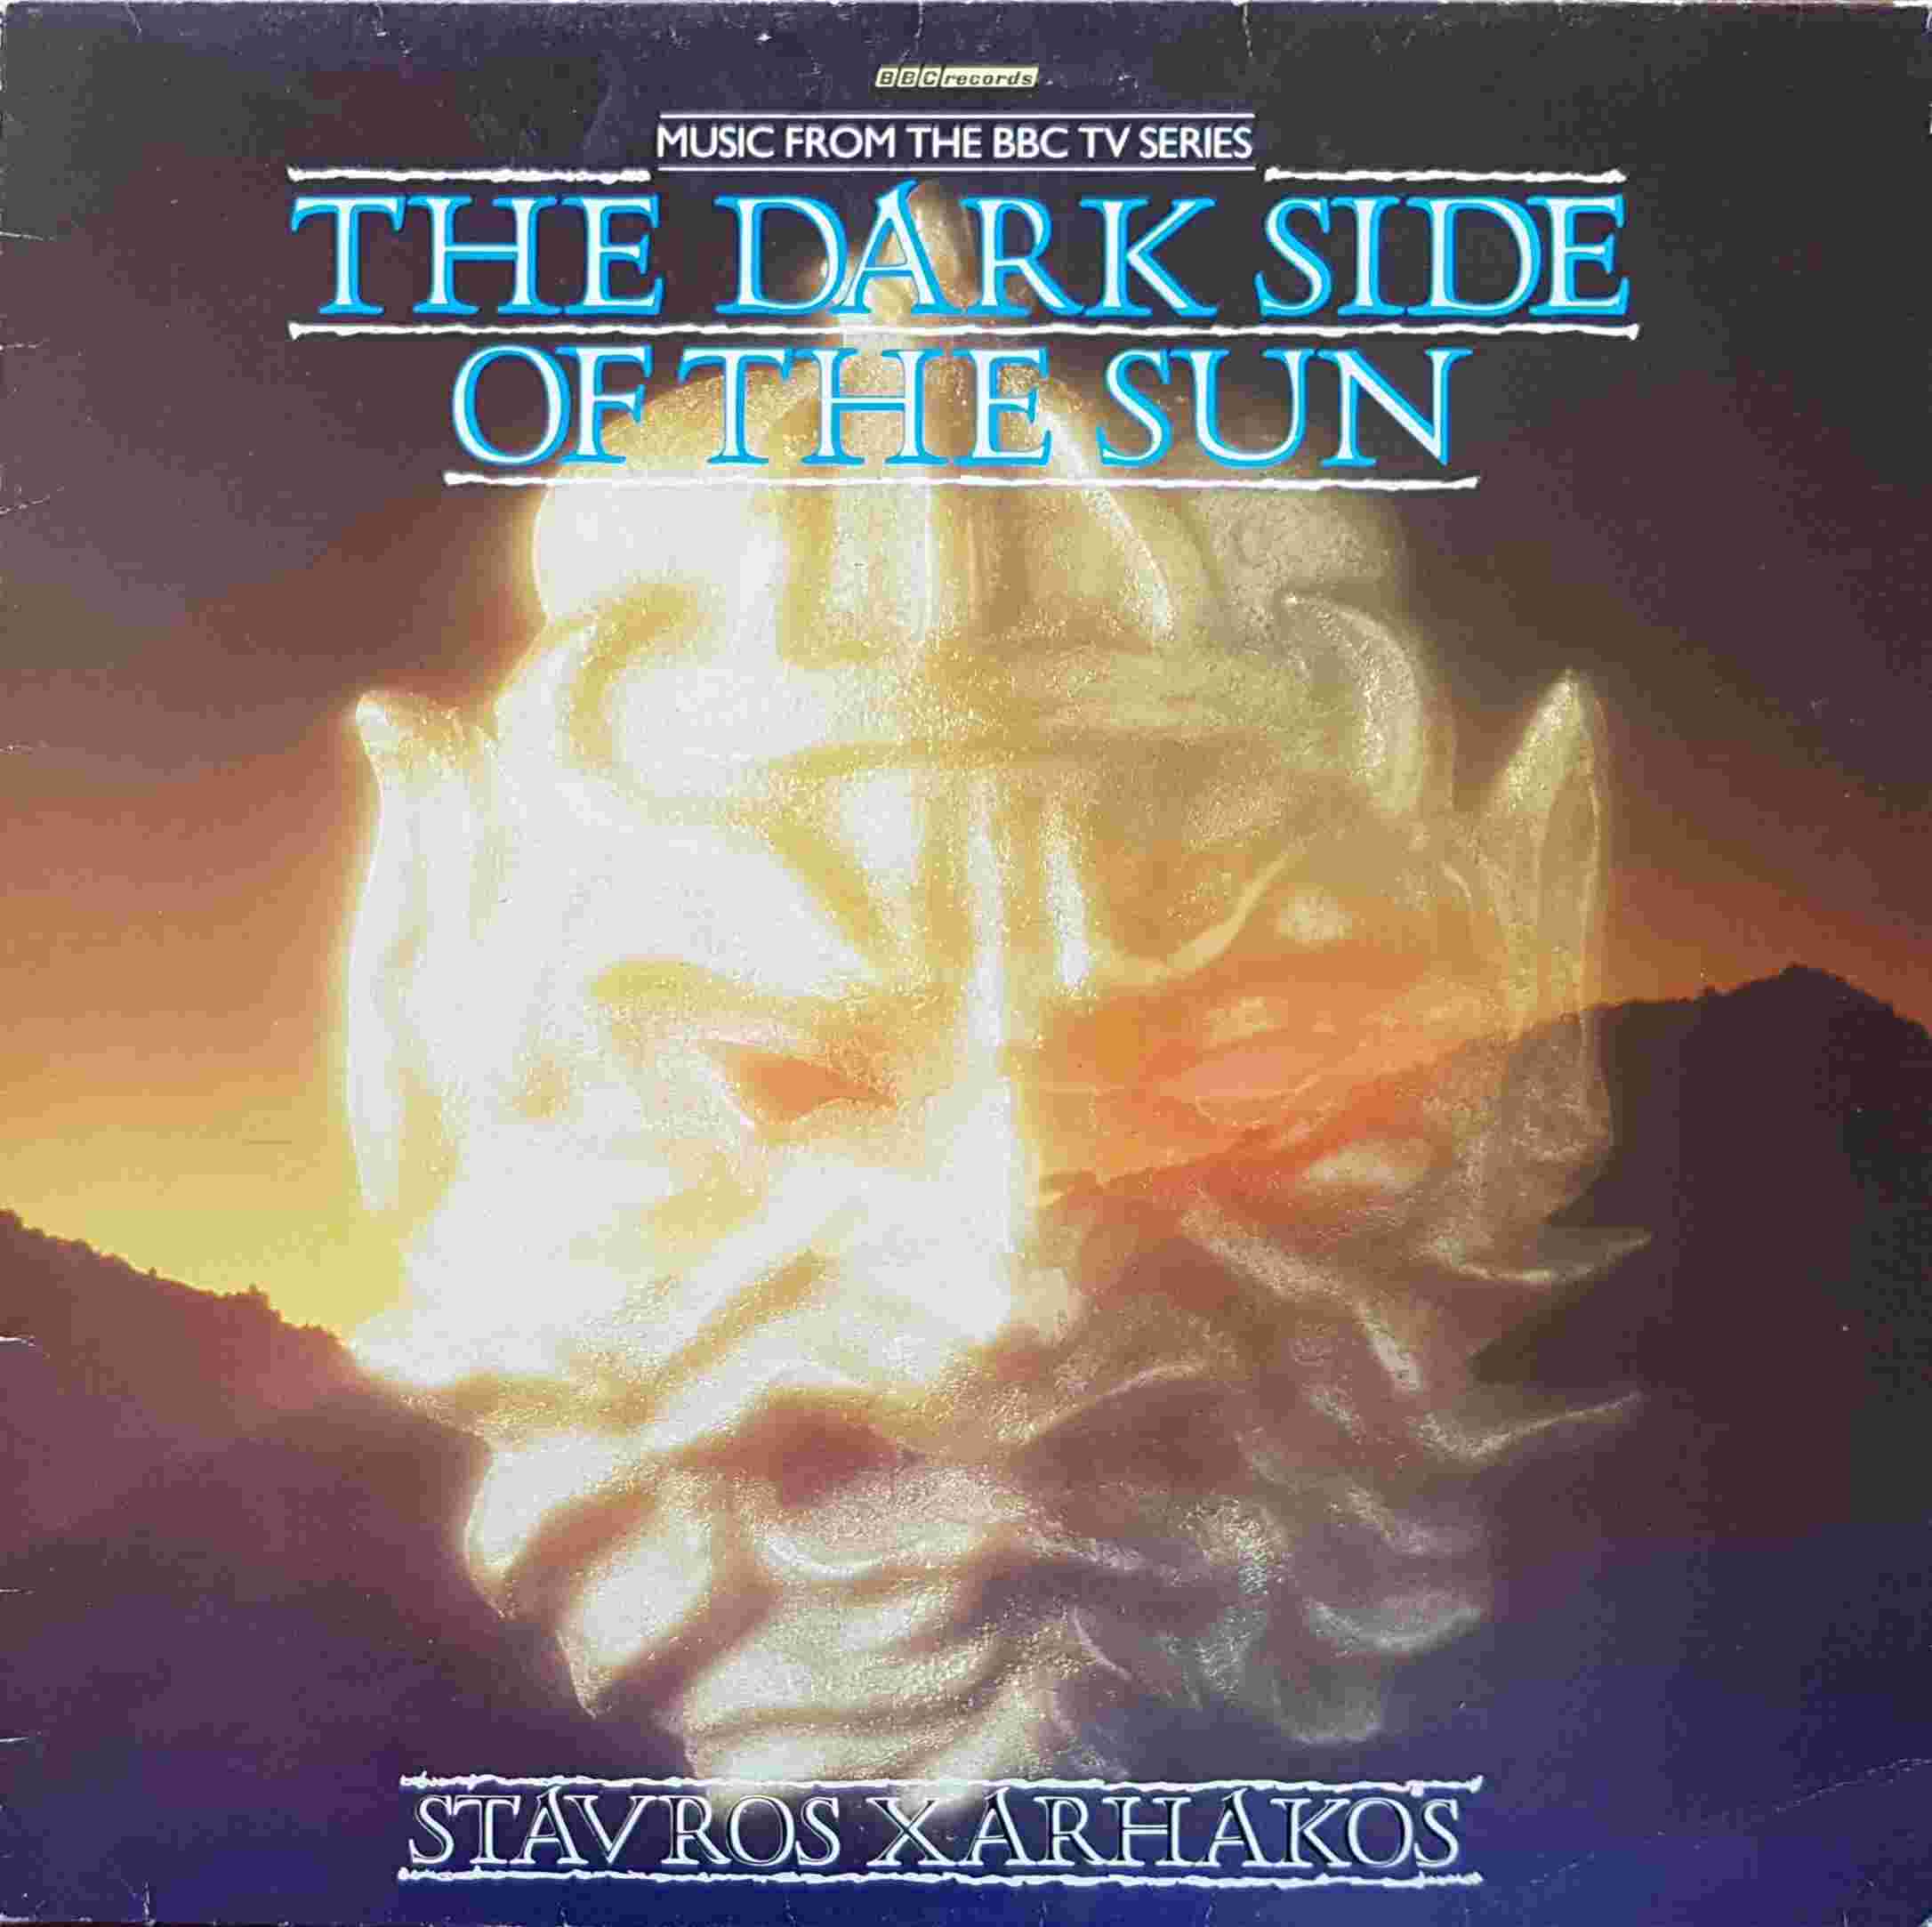 Picture of REB 487 The dark side of the Sun by artist Stavros Xarhakos from the BBC albums - Records and Tapes library